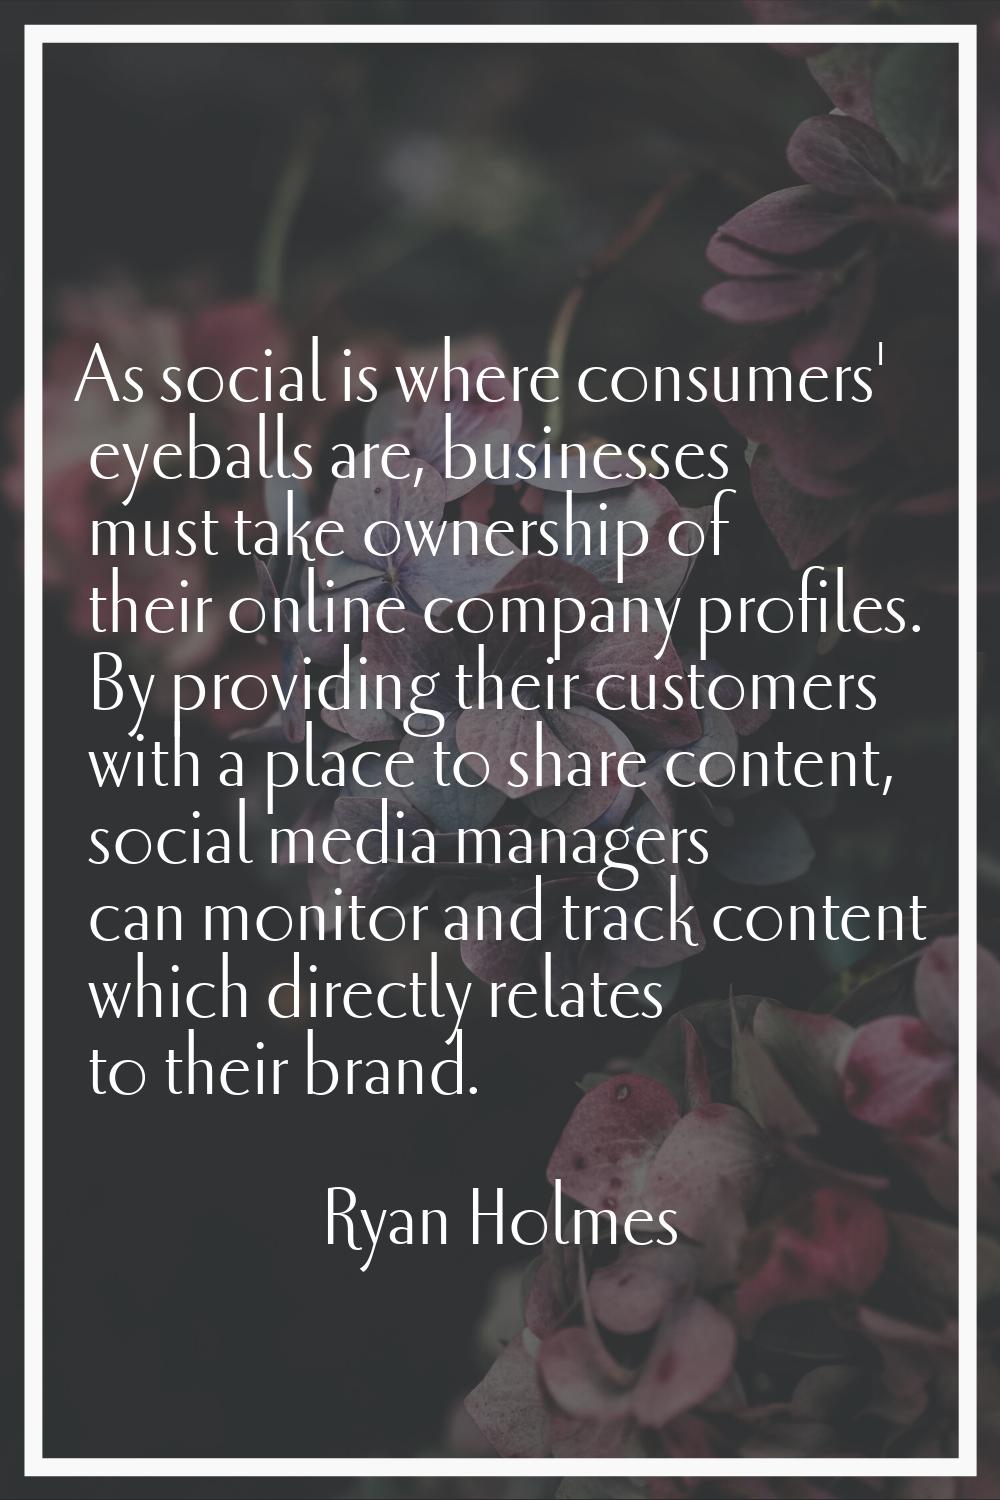 As social is where consumers' eyeballs are, businesses must take ownership of their online company 